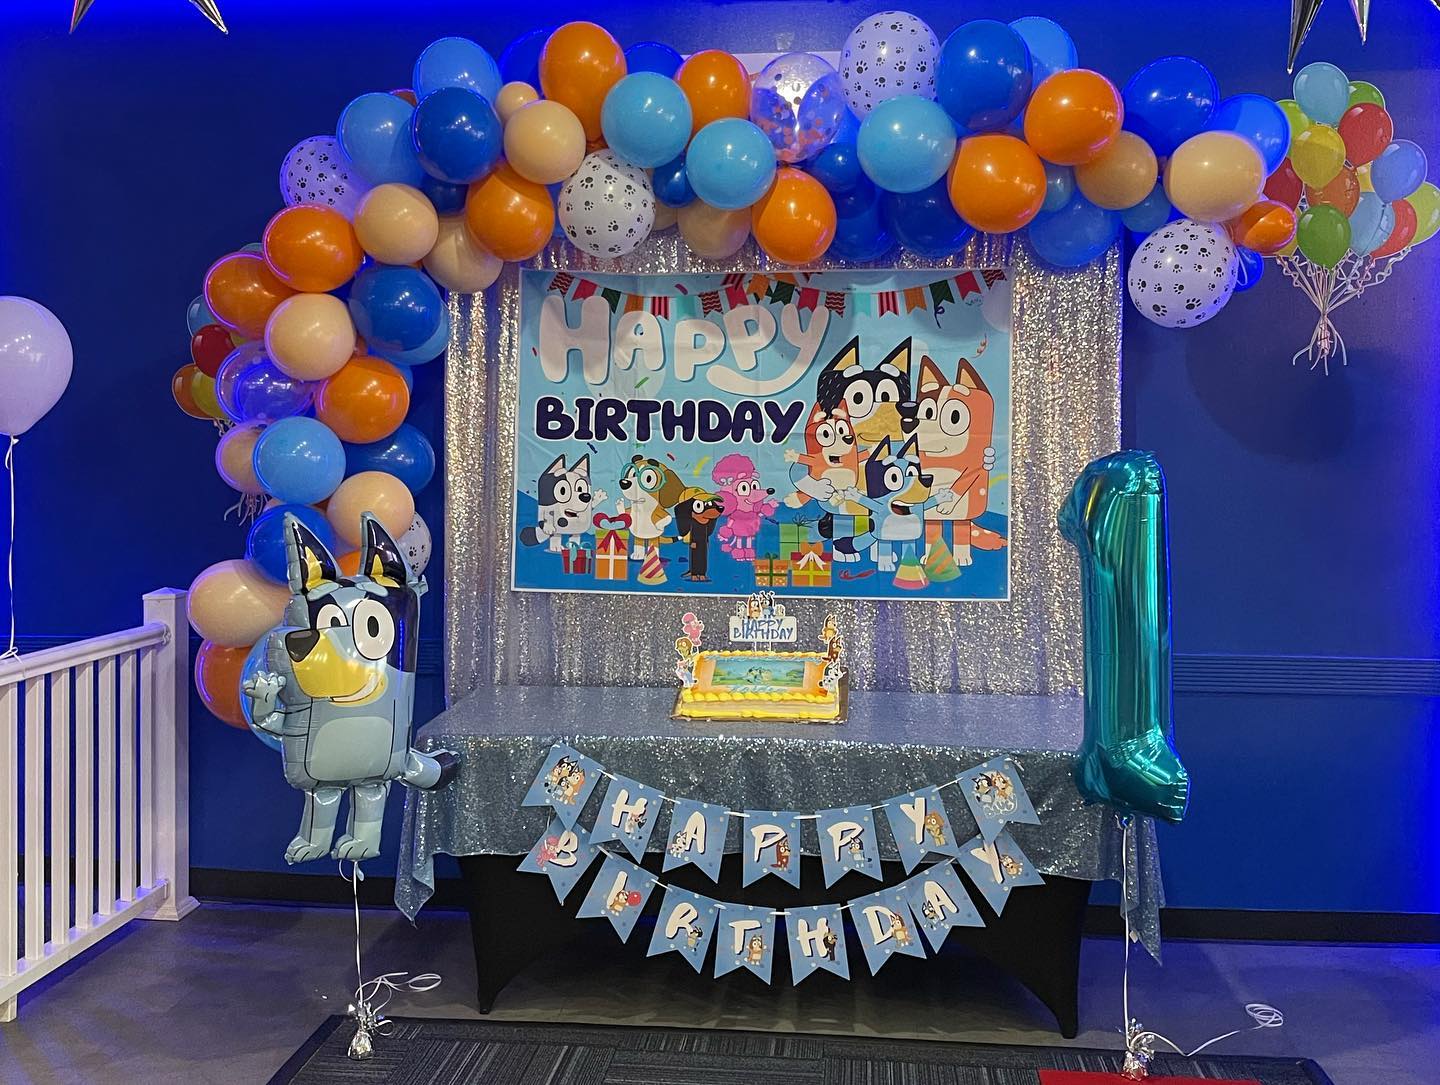 How to Choose a Theme for Your Kid's Birthday Party